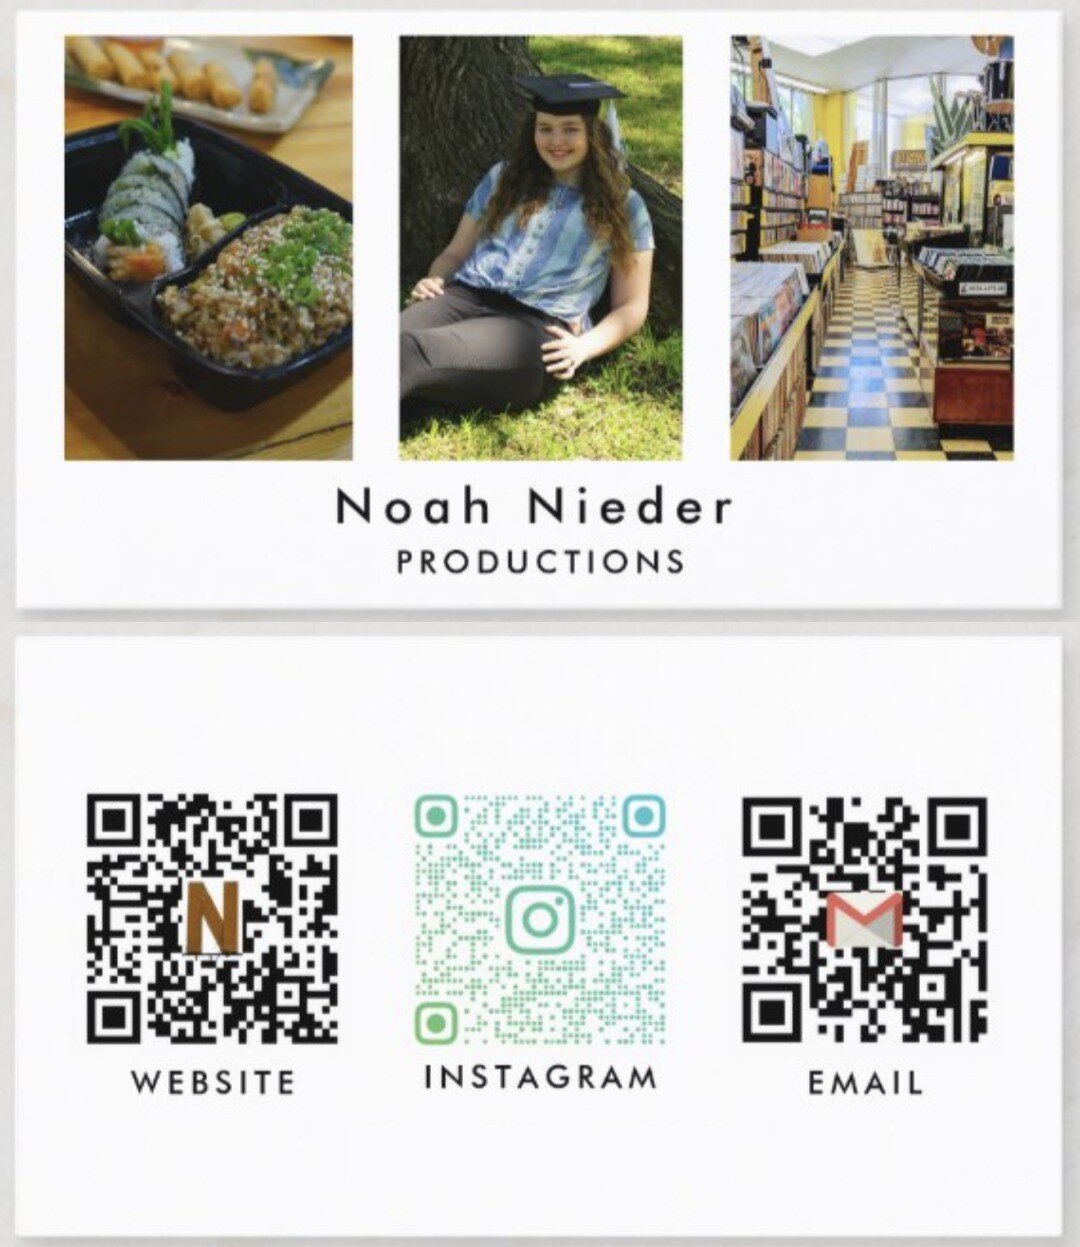 I finally got business cards. Usually, I have my phone number on these, but since this is going on Insta for the world to see I decided to edit that out. But if you need to reach me you can always contact me here or through my email/website.